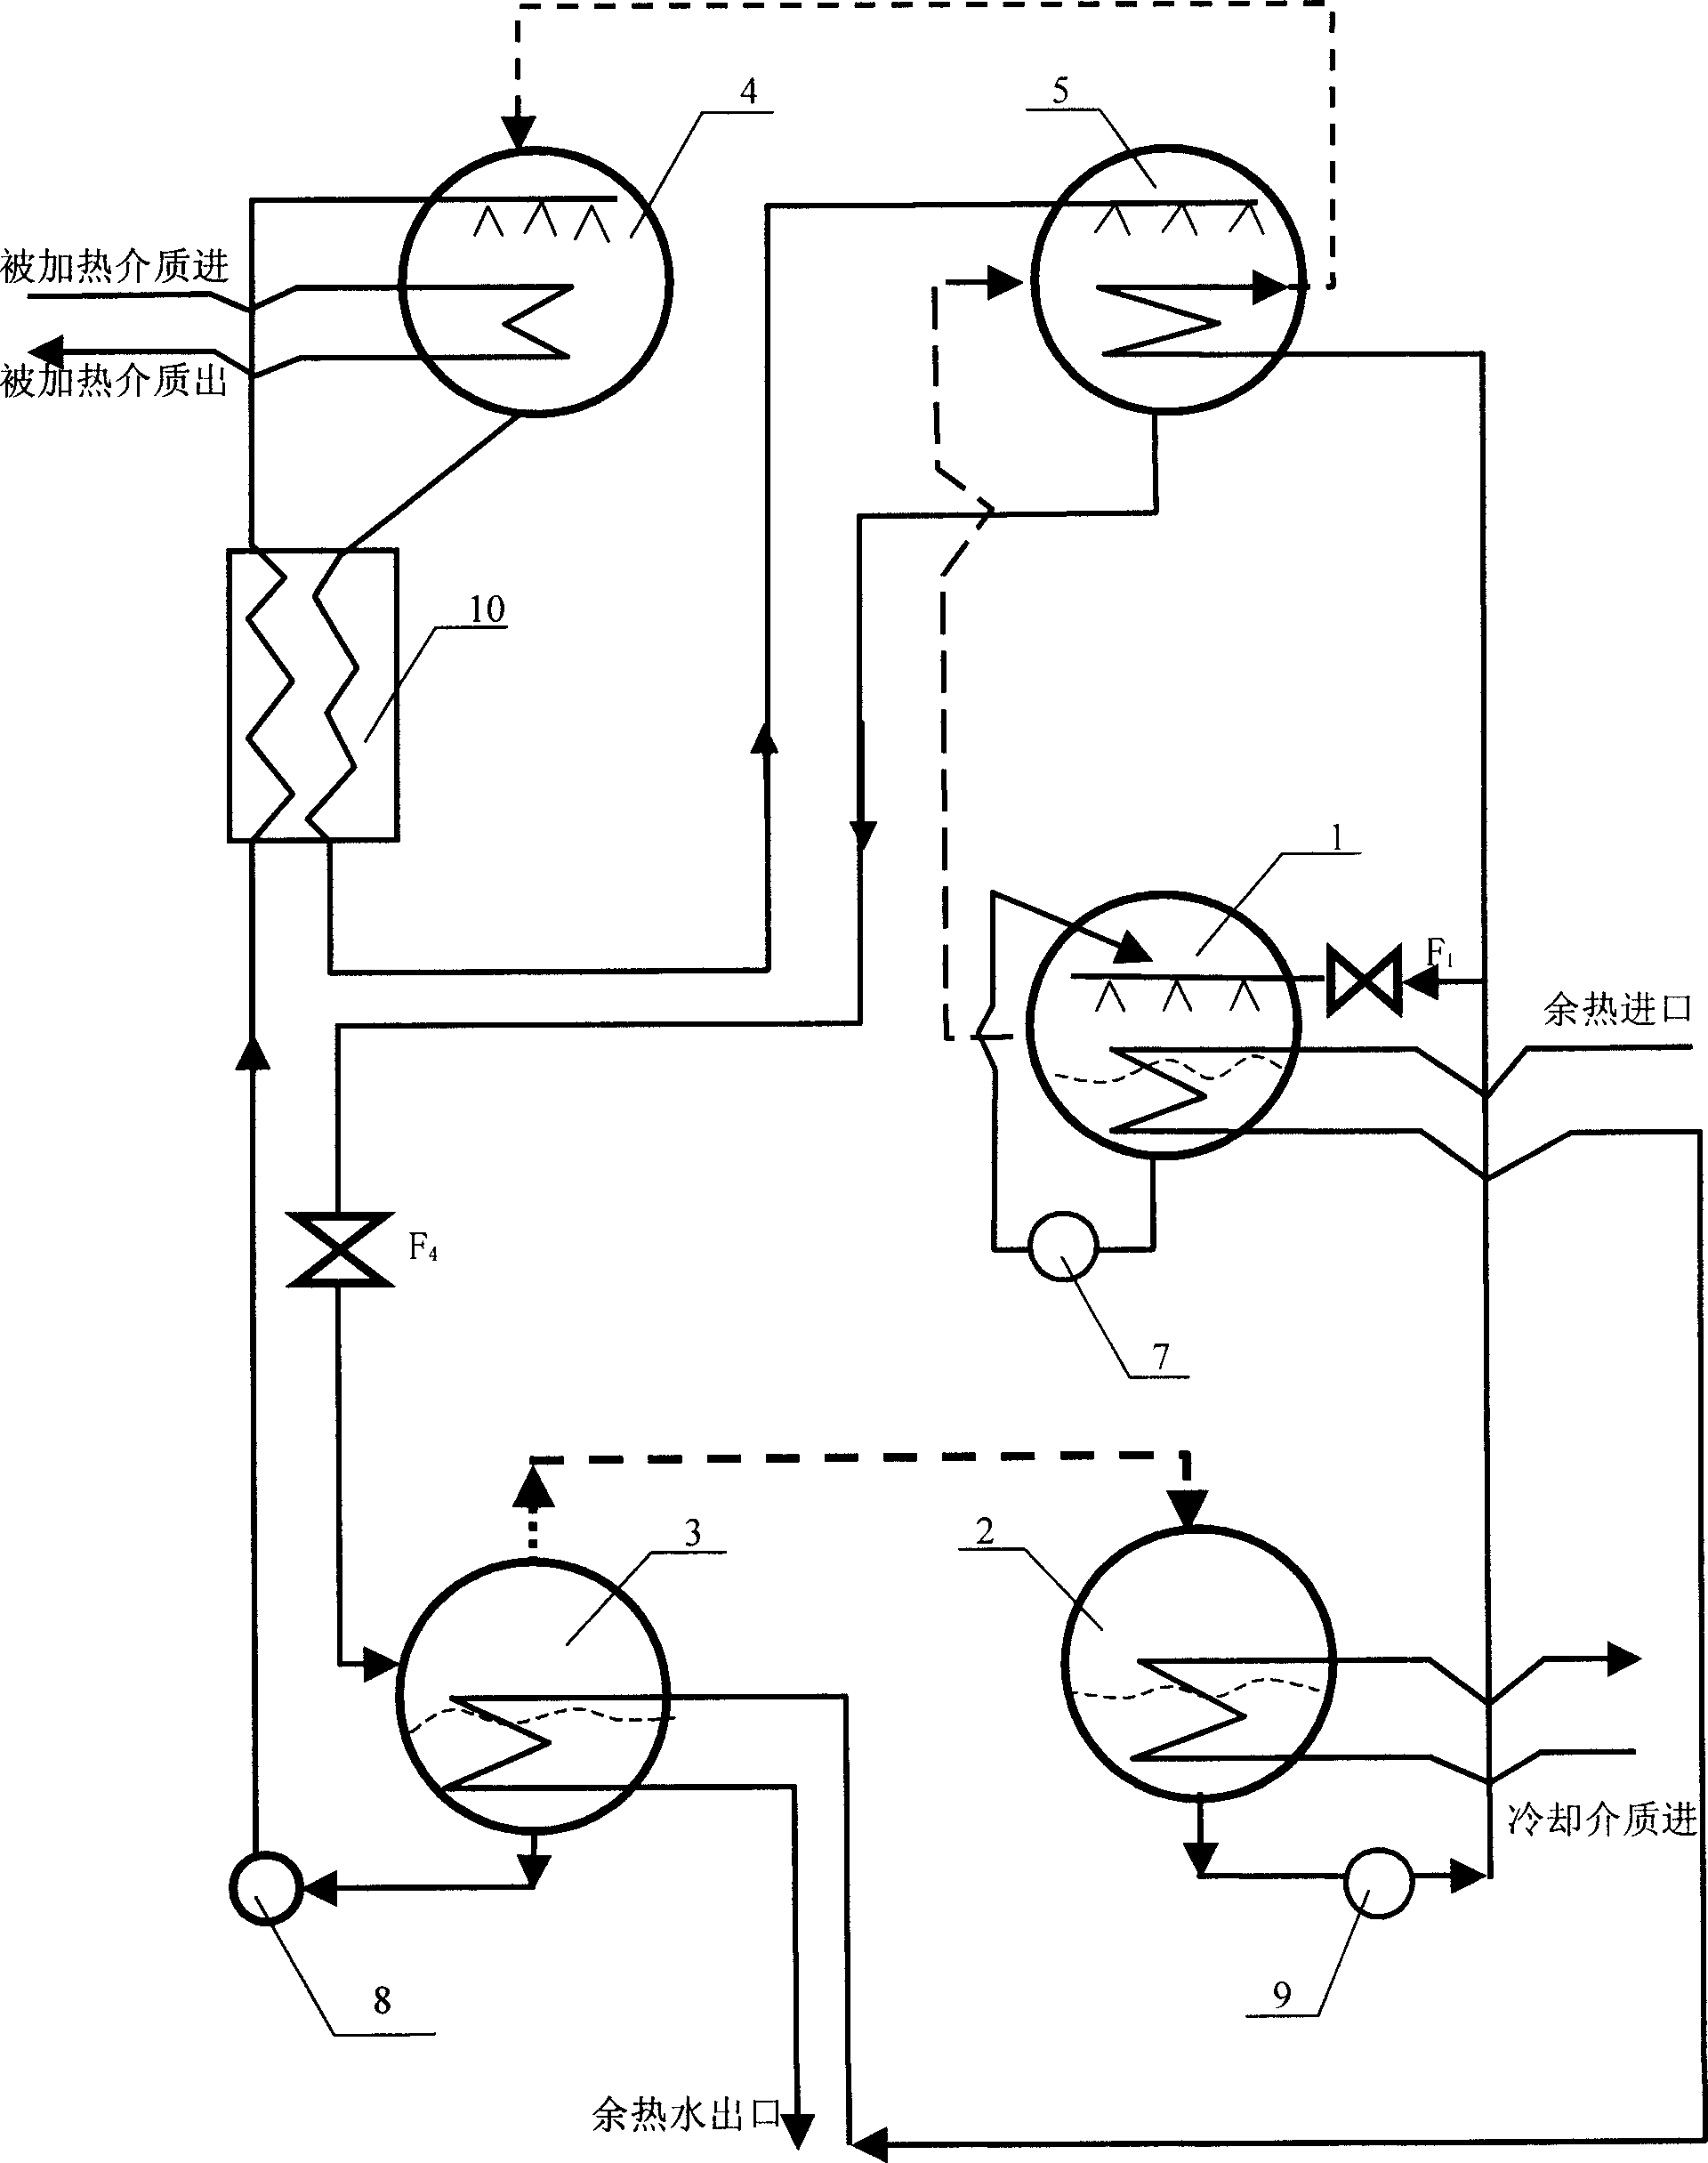 Two-stage and multi-stage type-II absorption heat transformer